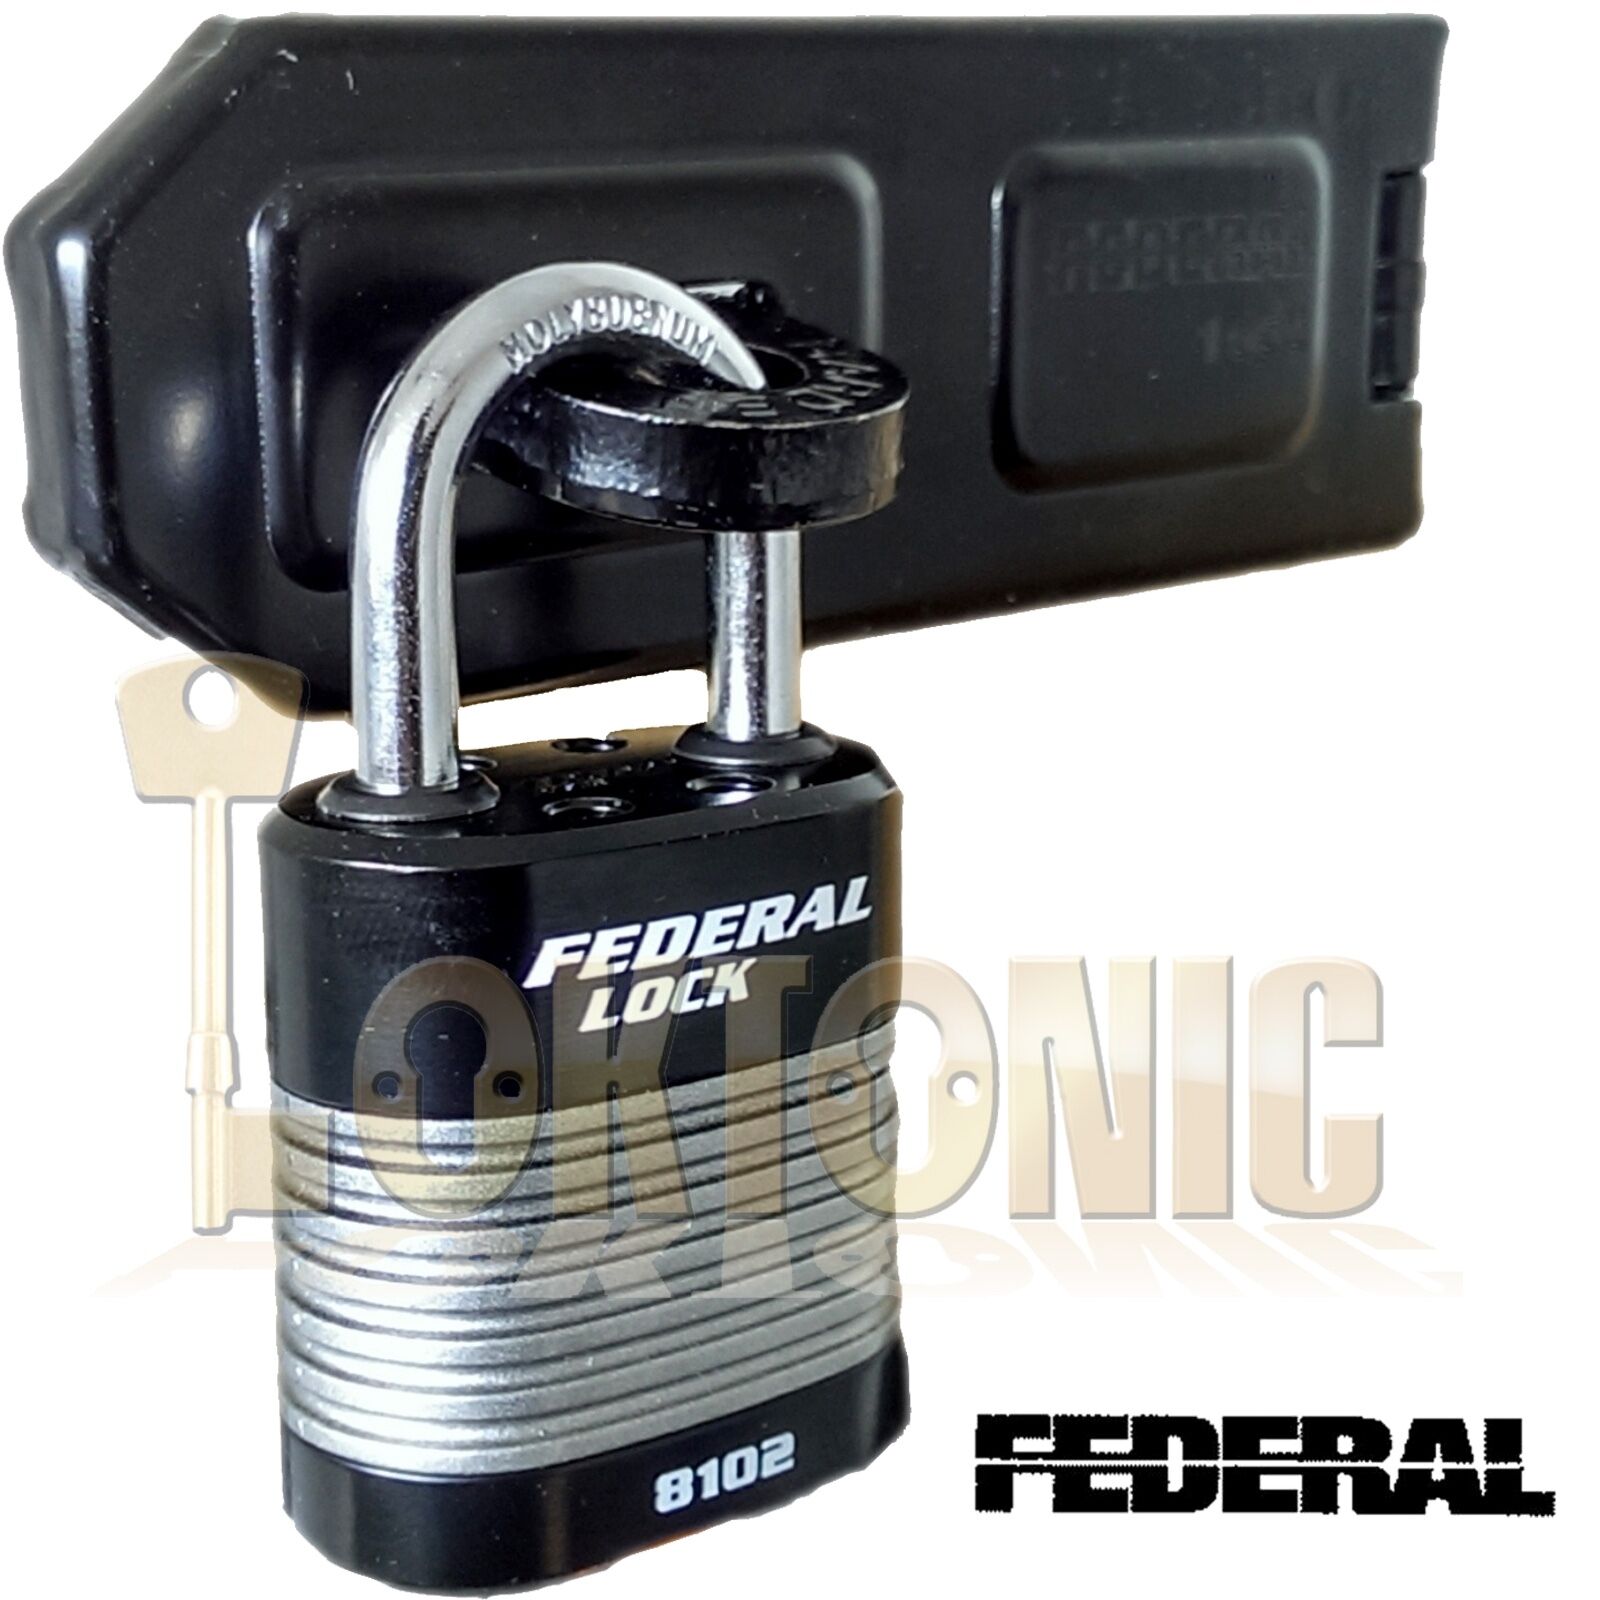 FEDERAL HIGH SECURITY VAN SHED GATE HASP STAPLE AND PADLOCK COMBO FD2025+FD8103 